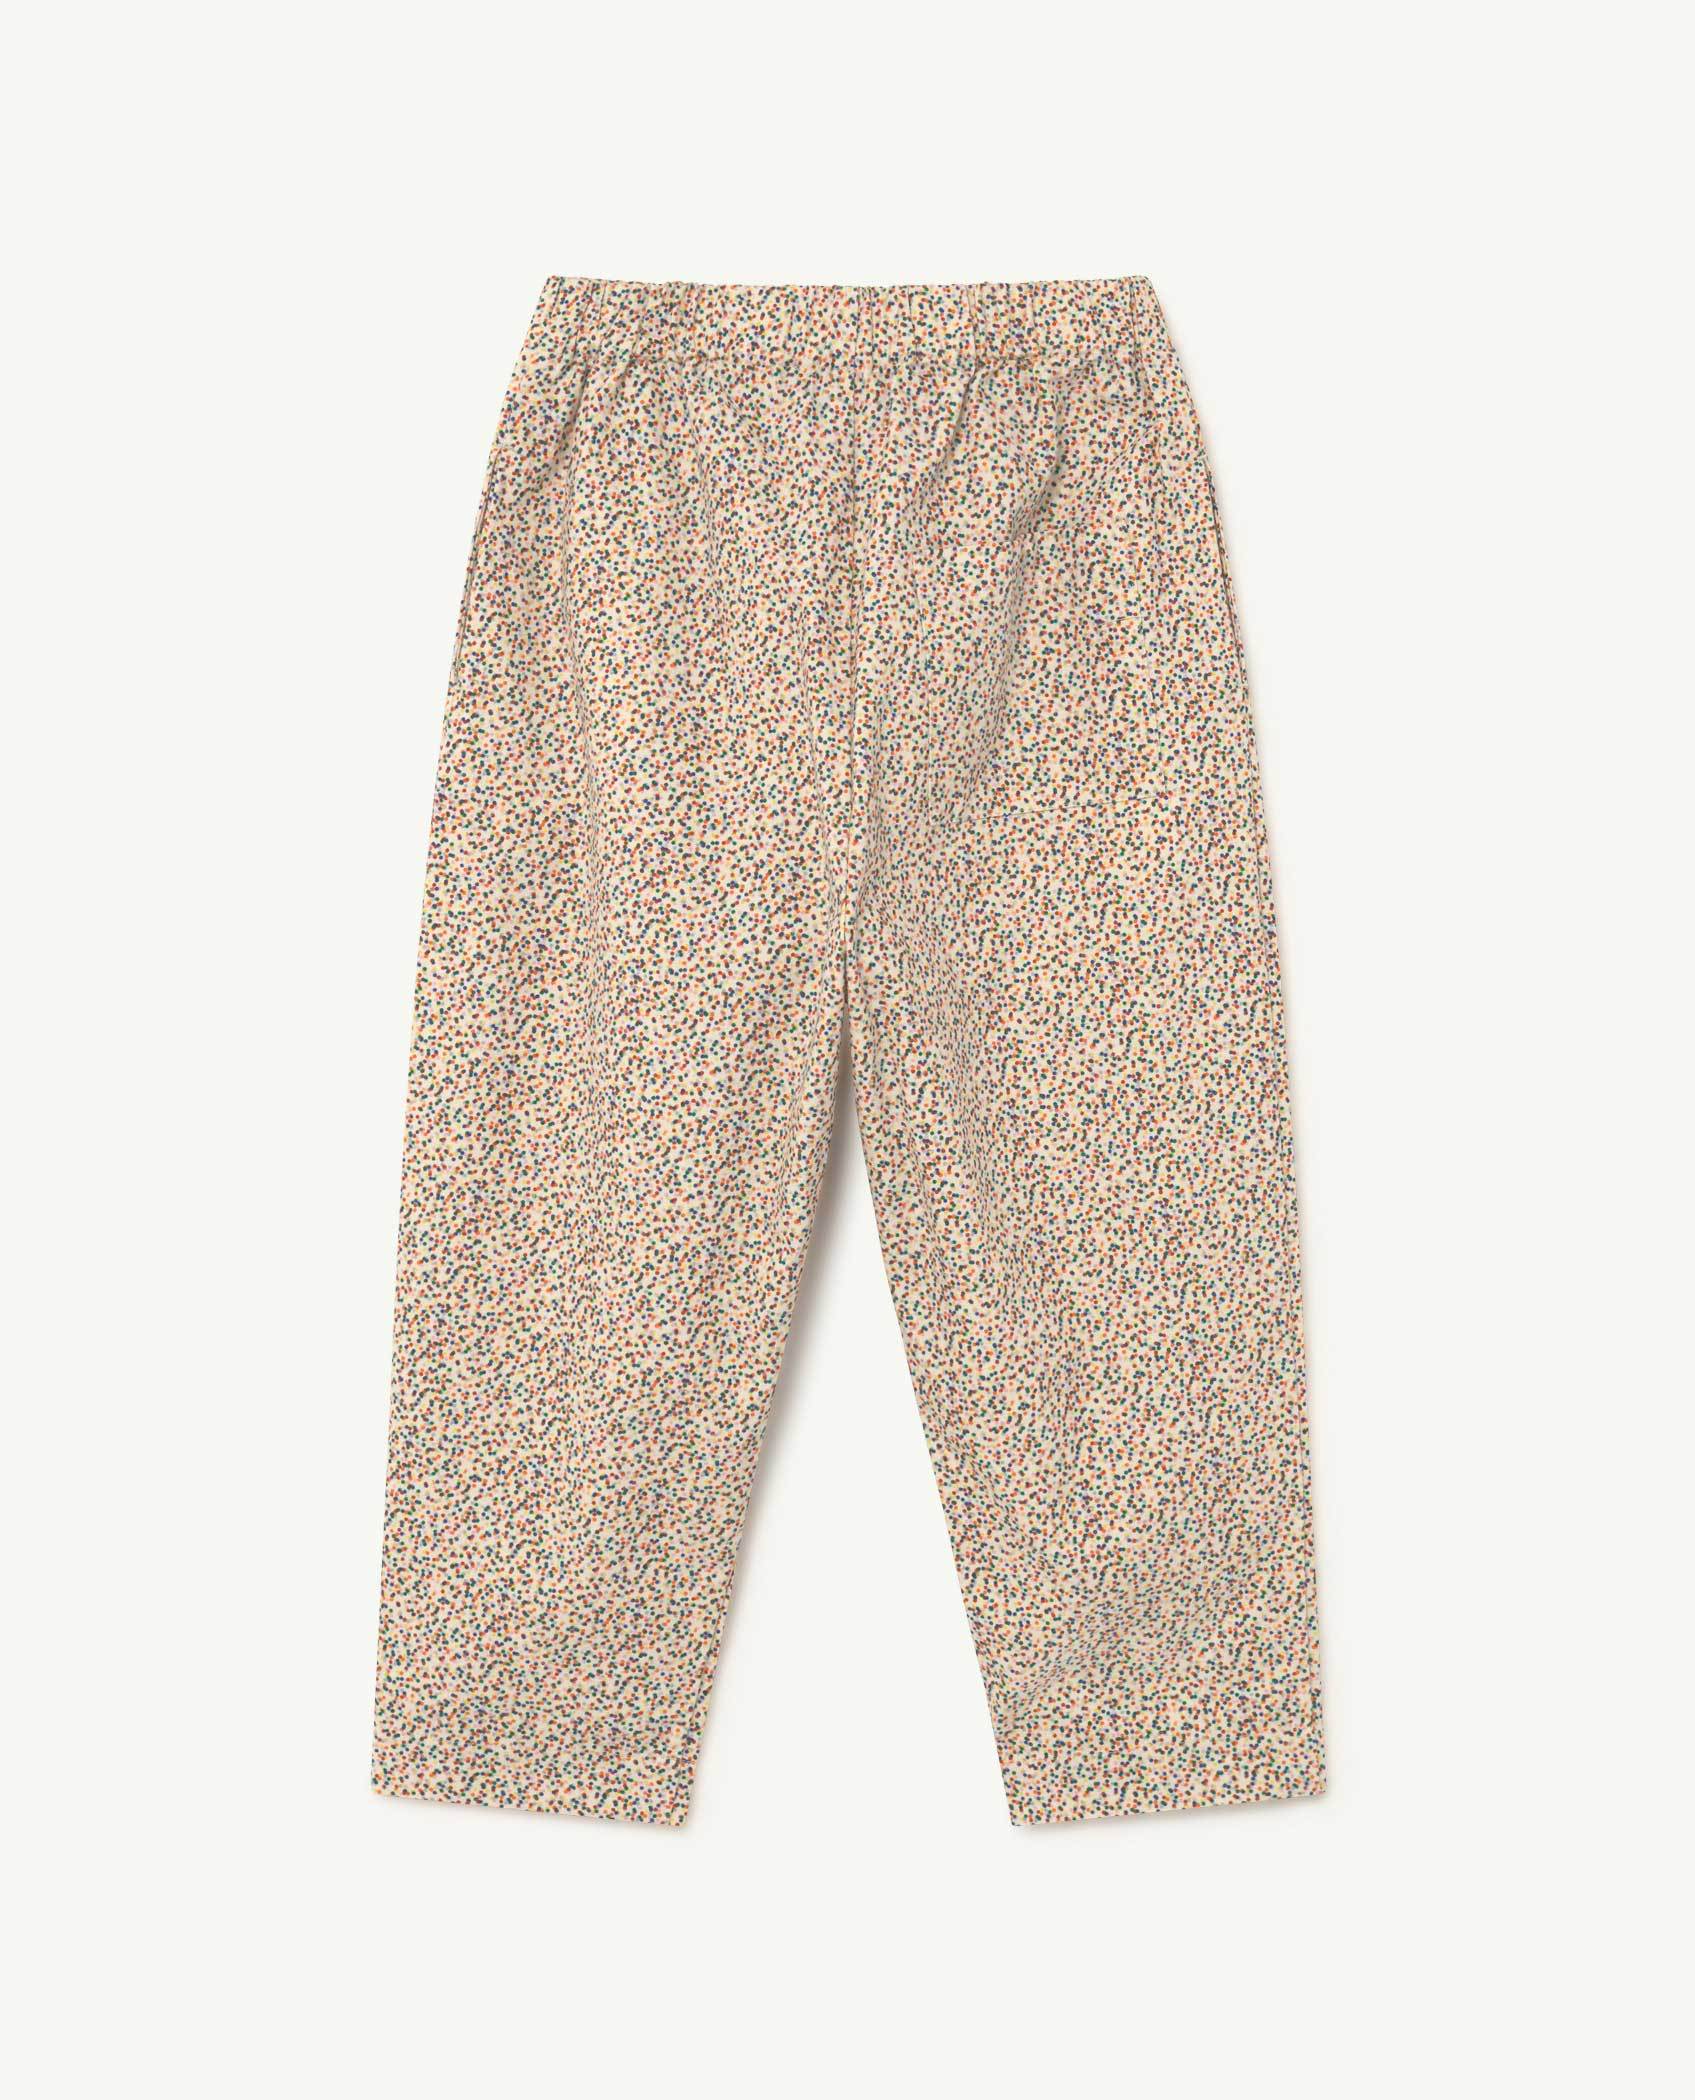 White Dots Elephant Trousers PRODUCT BACK